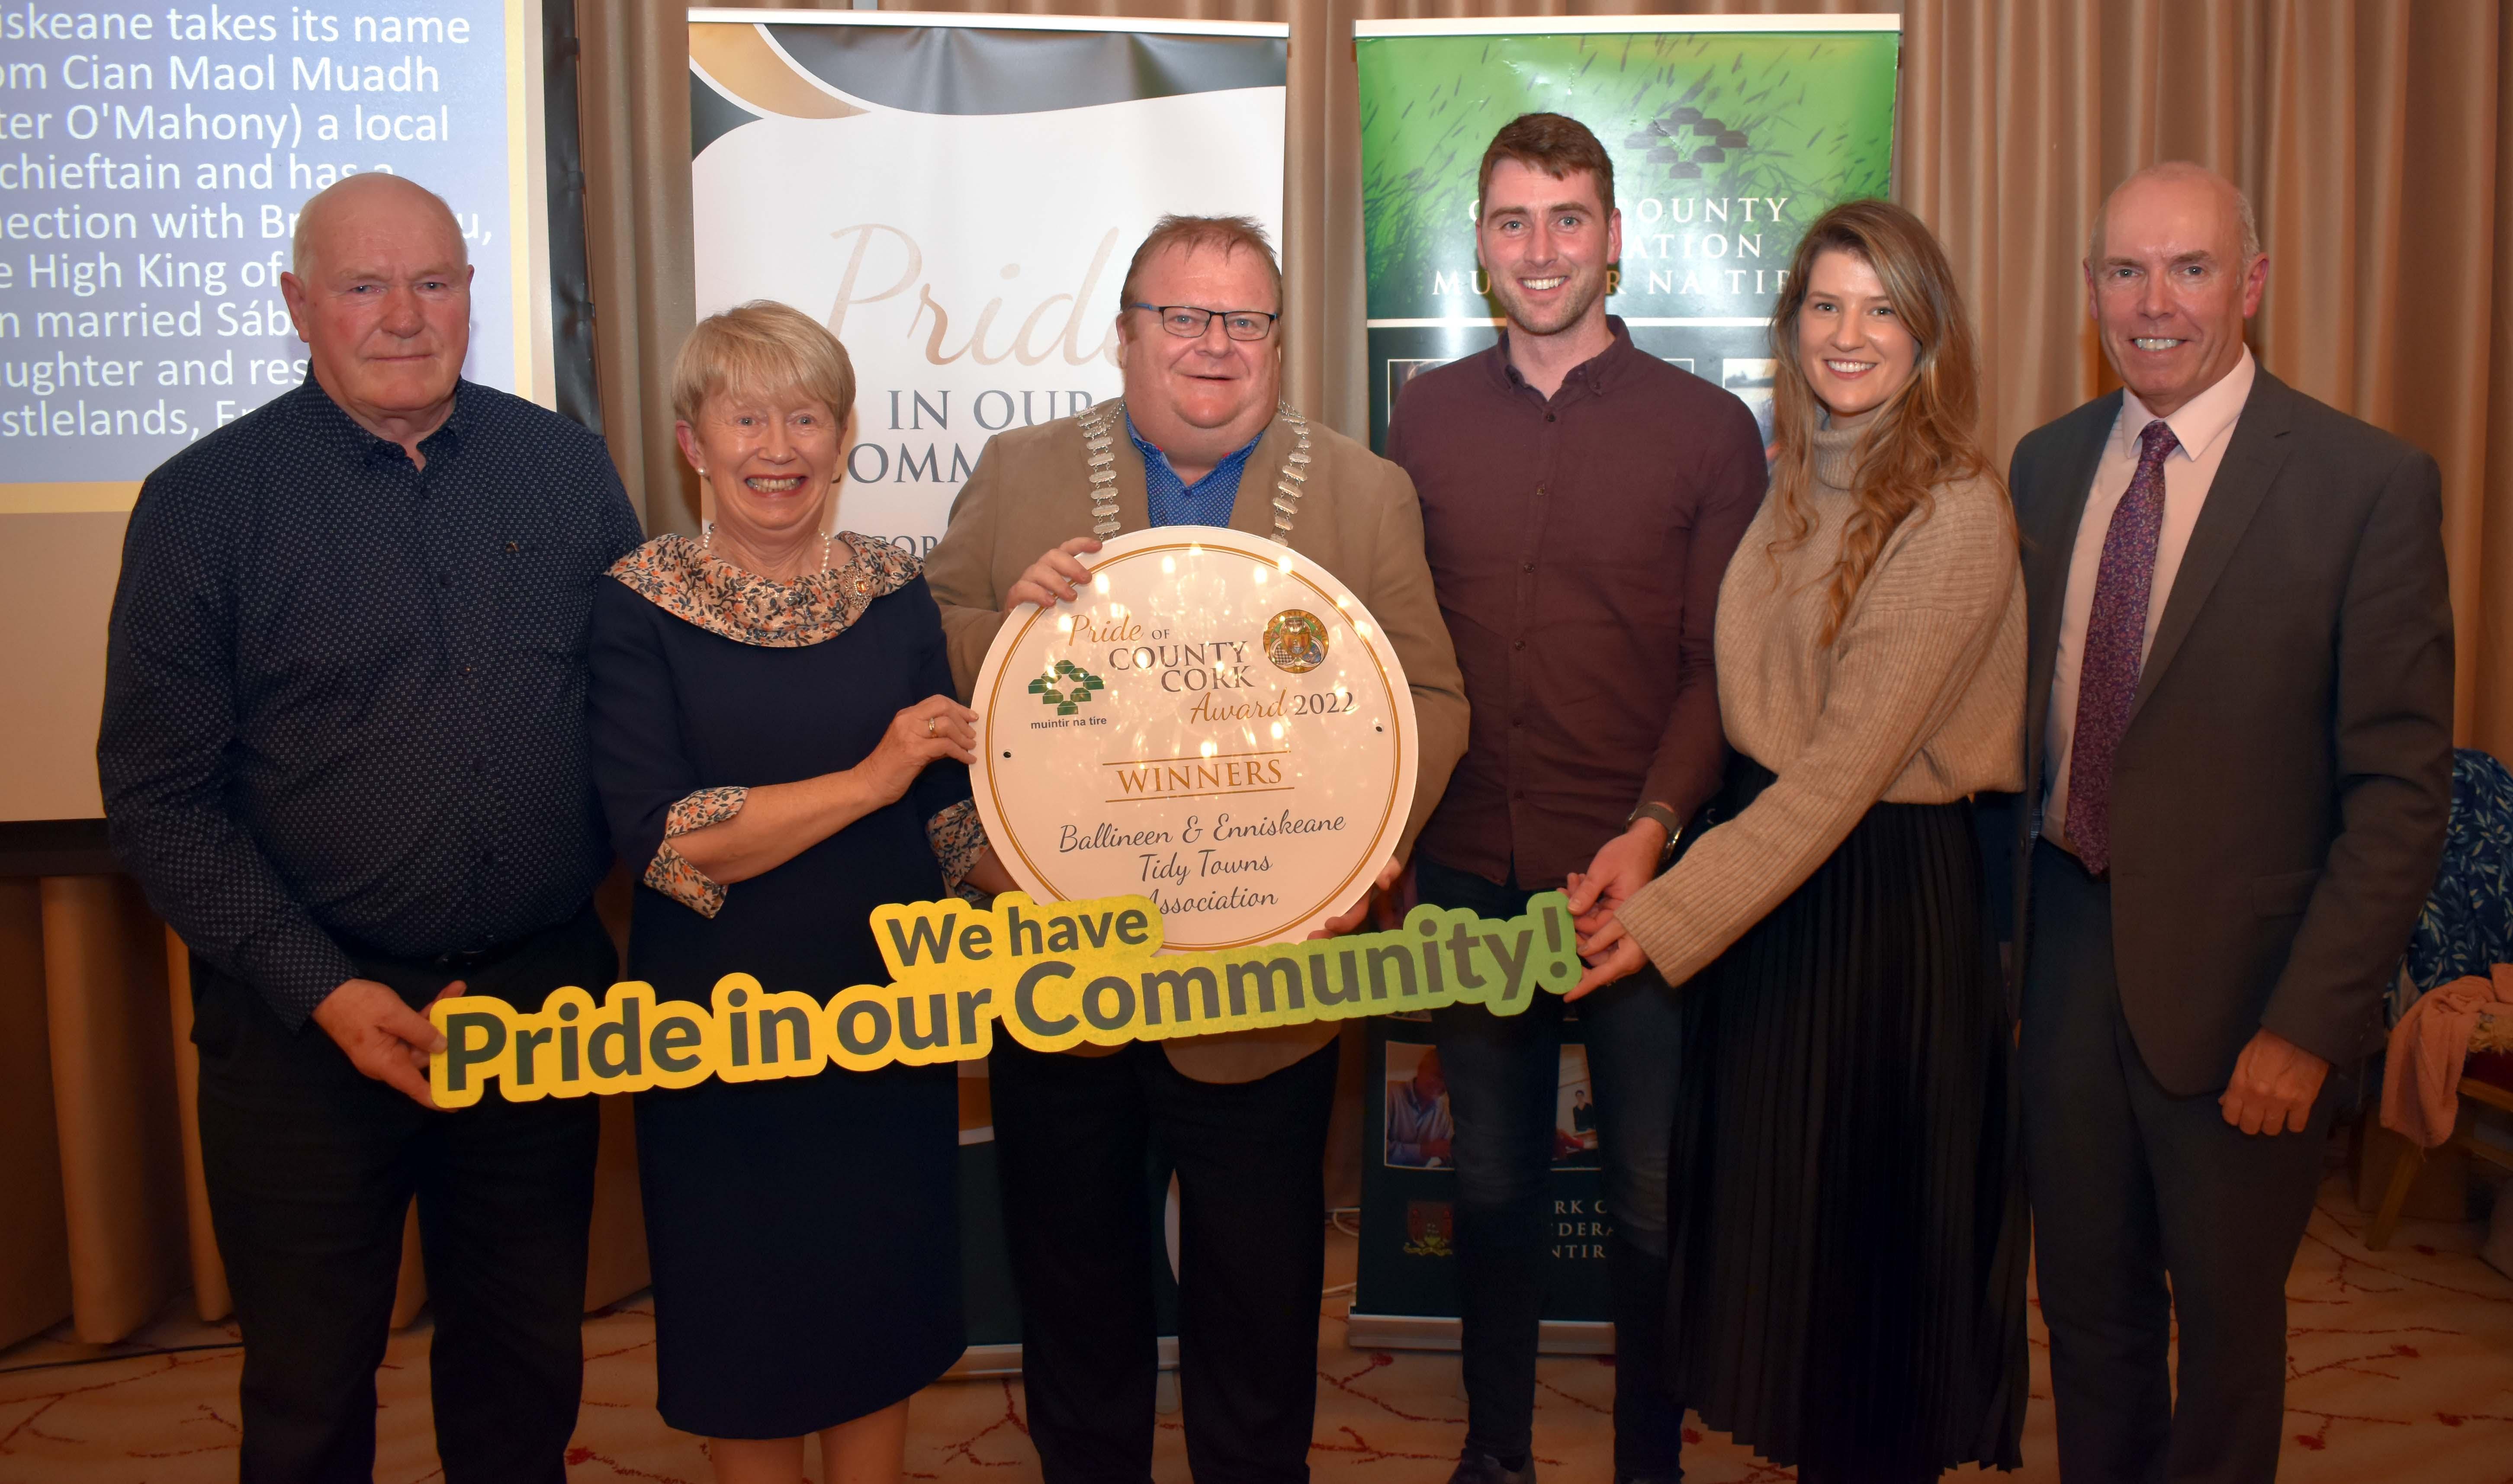 Mayor Collins presenting the Pride in County Cork Award to Ballineen and Enniskeane Tidy Towns Association